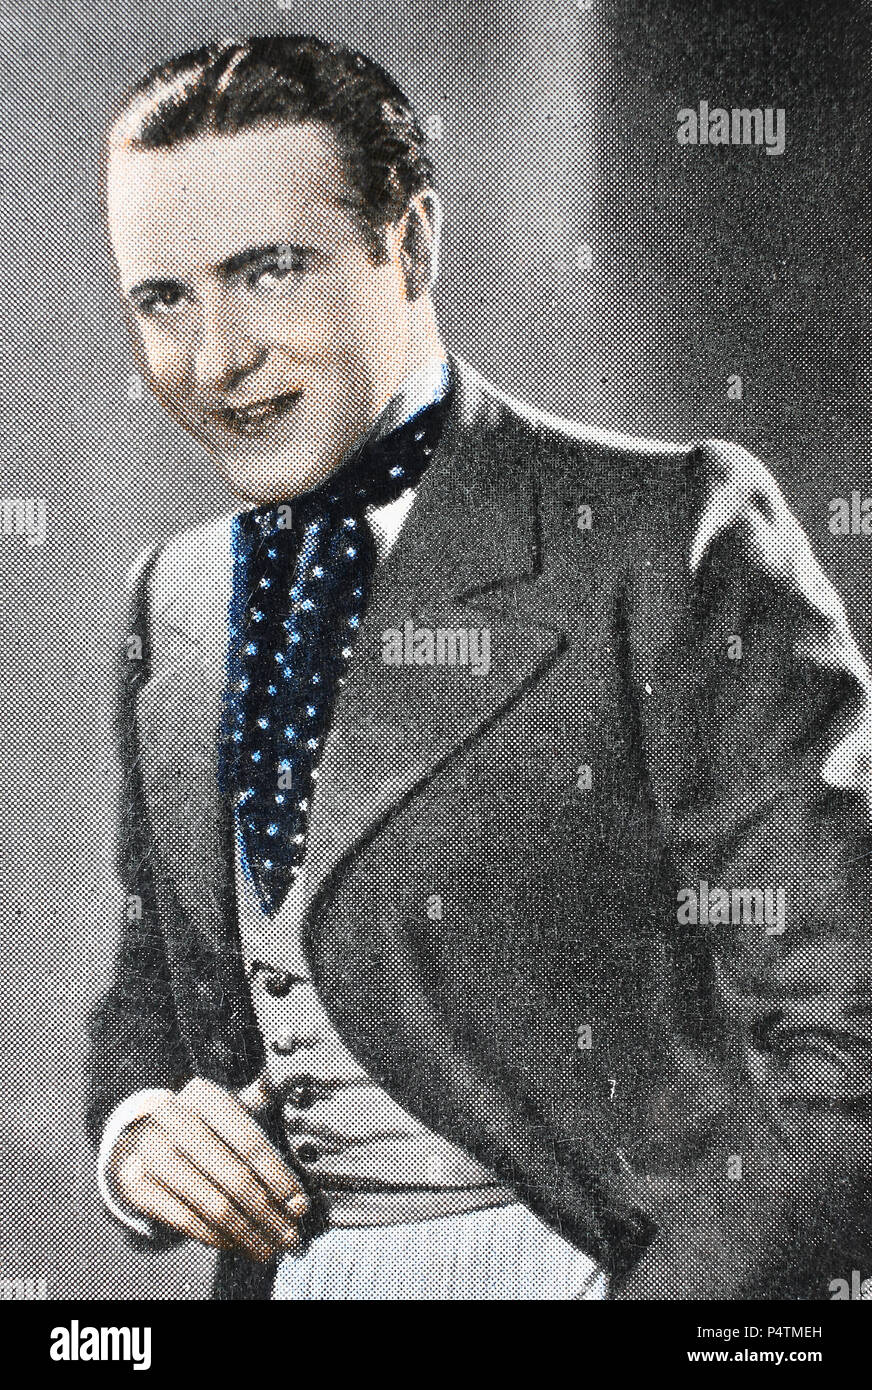 Willy Fritsch (27 January 1901 â€“ 13 July 1973) was a German theater and film actor, digital improved reproduction of an historical image Stock Photo